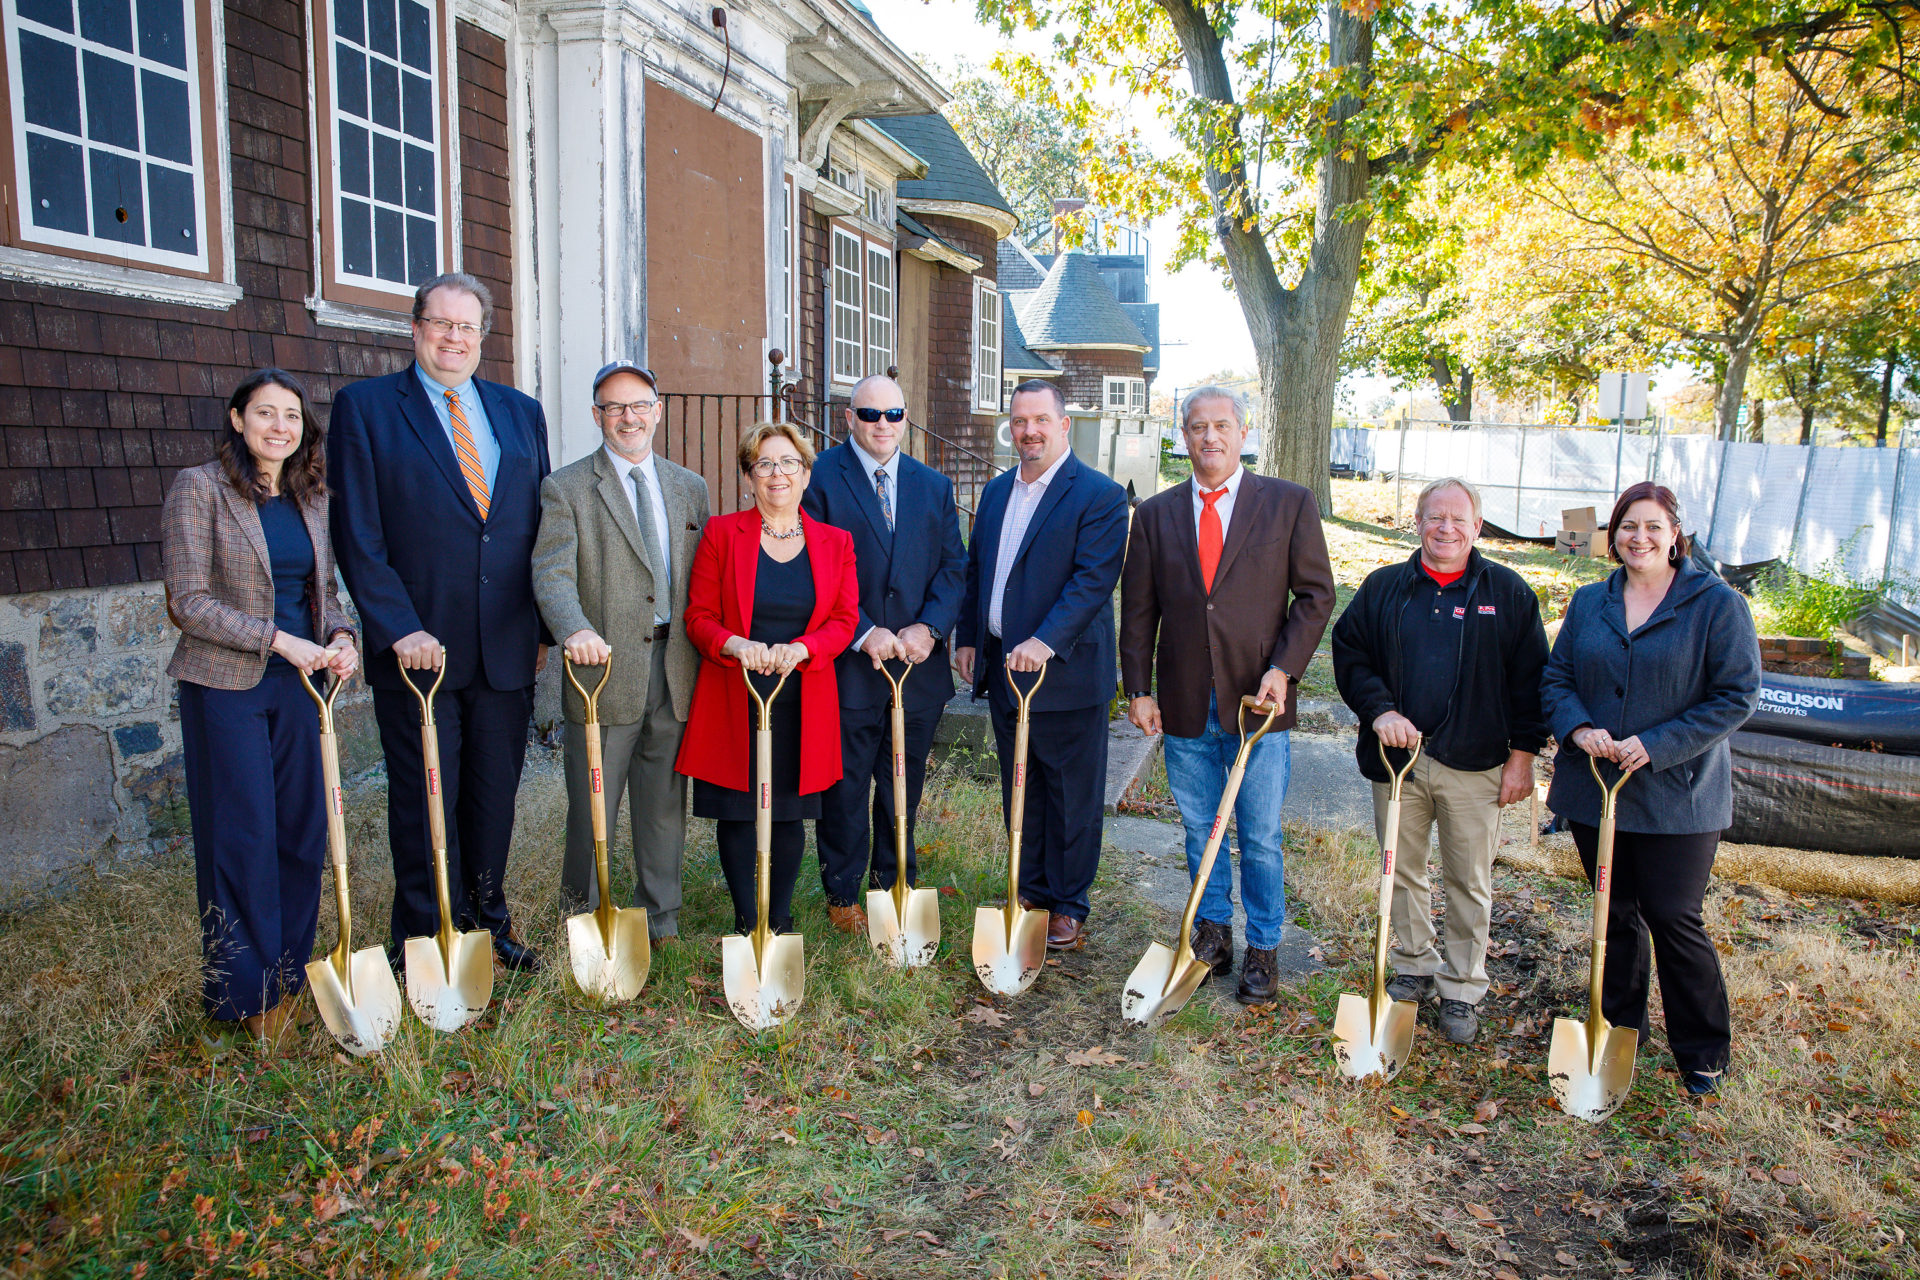 AHF staff, project team members, local leaders, and advocates break ground outside the historic Speedway buildings.